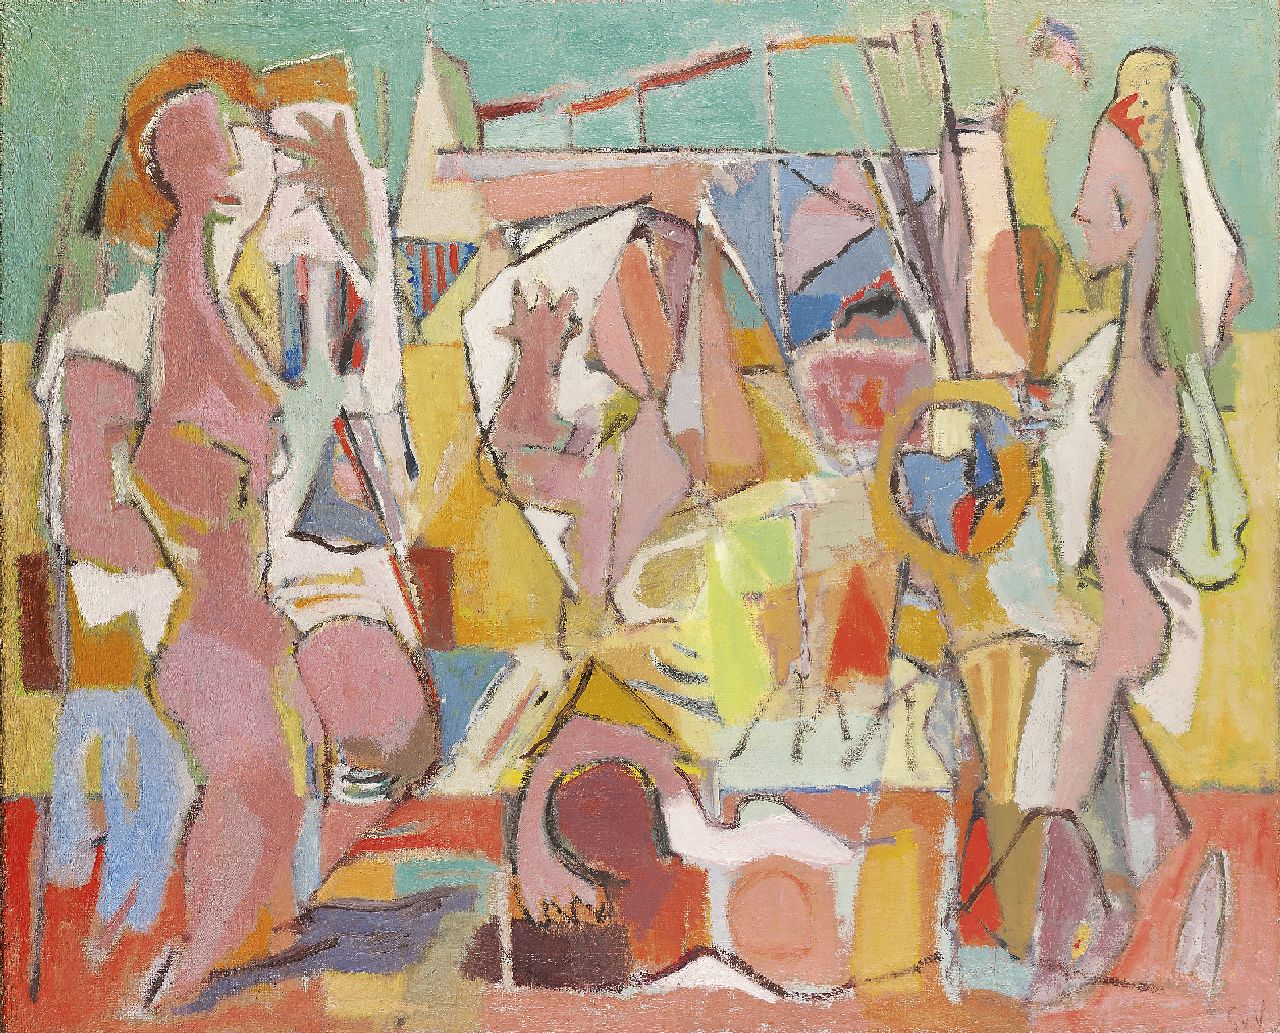 Velde G. van | Gerardus 'Geer' van Velde, Composition: At the beach, oil on canvas 81.7 x 99.3 cm, signed l.r. with initials and painted ca. 1940